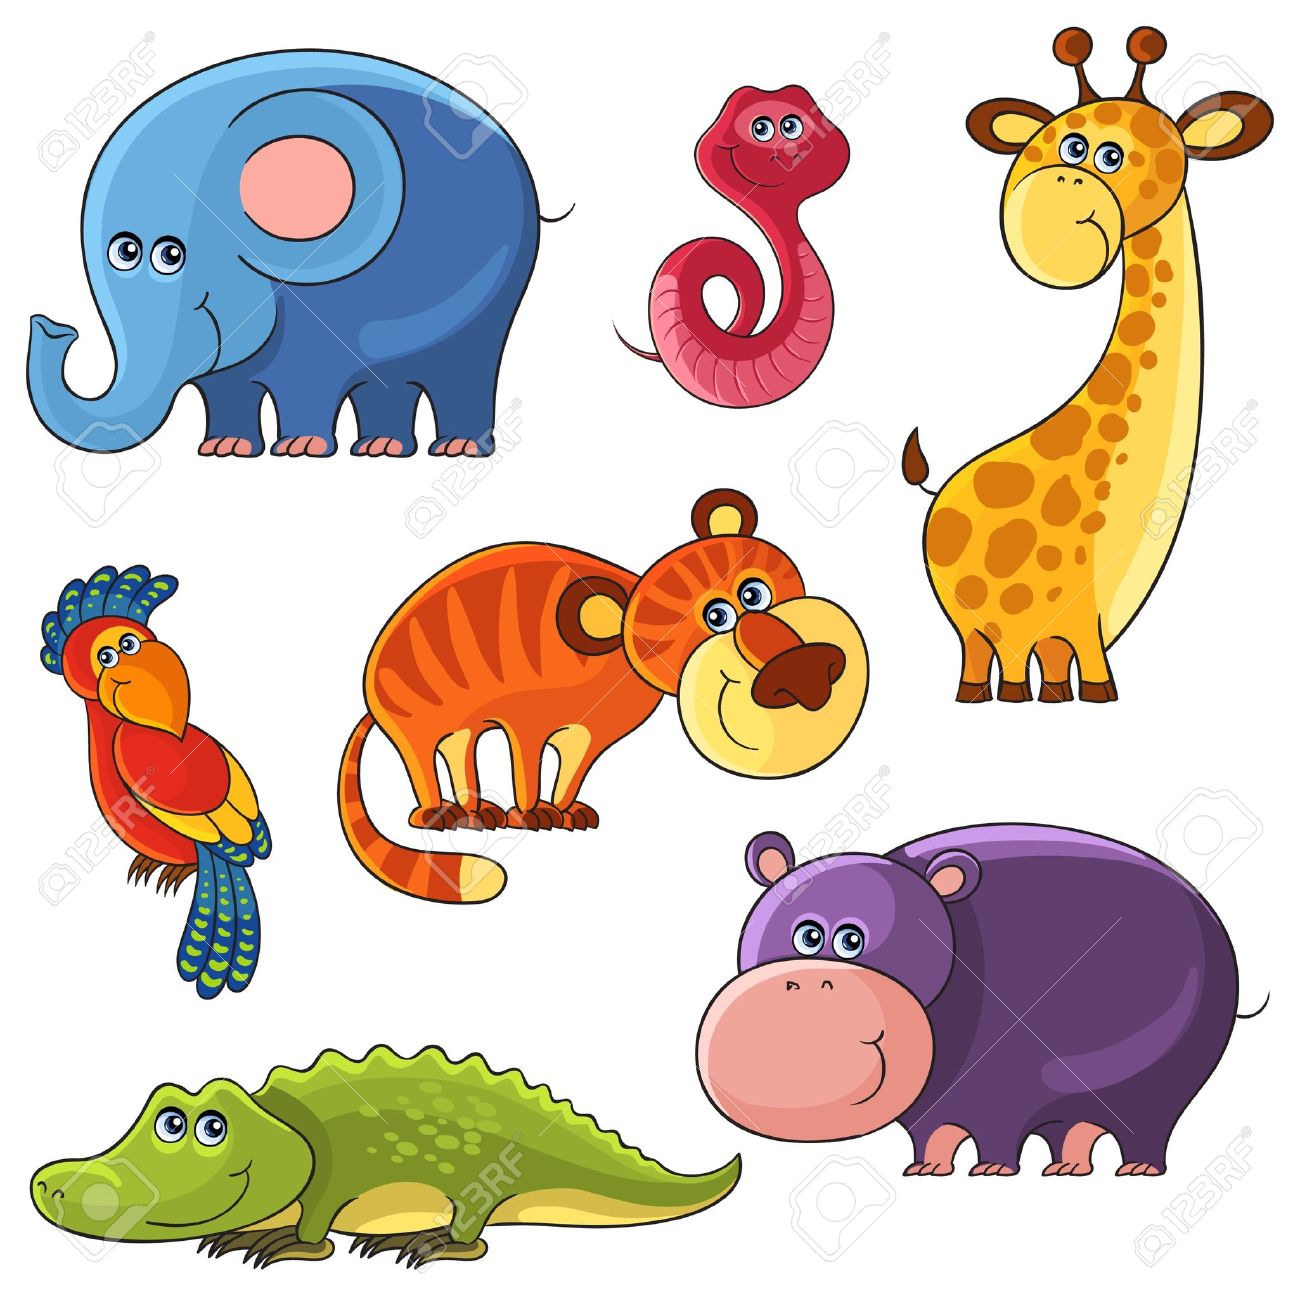 Clipart animaux sauvages.